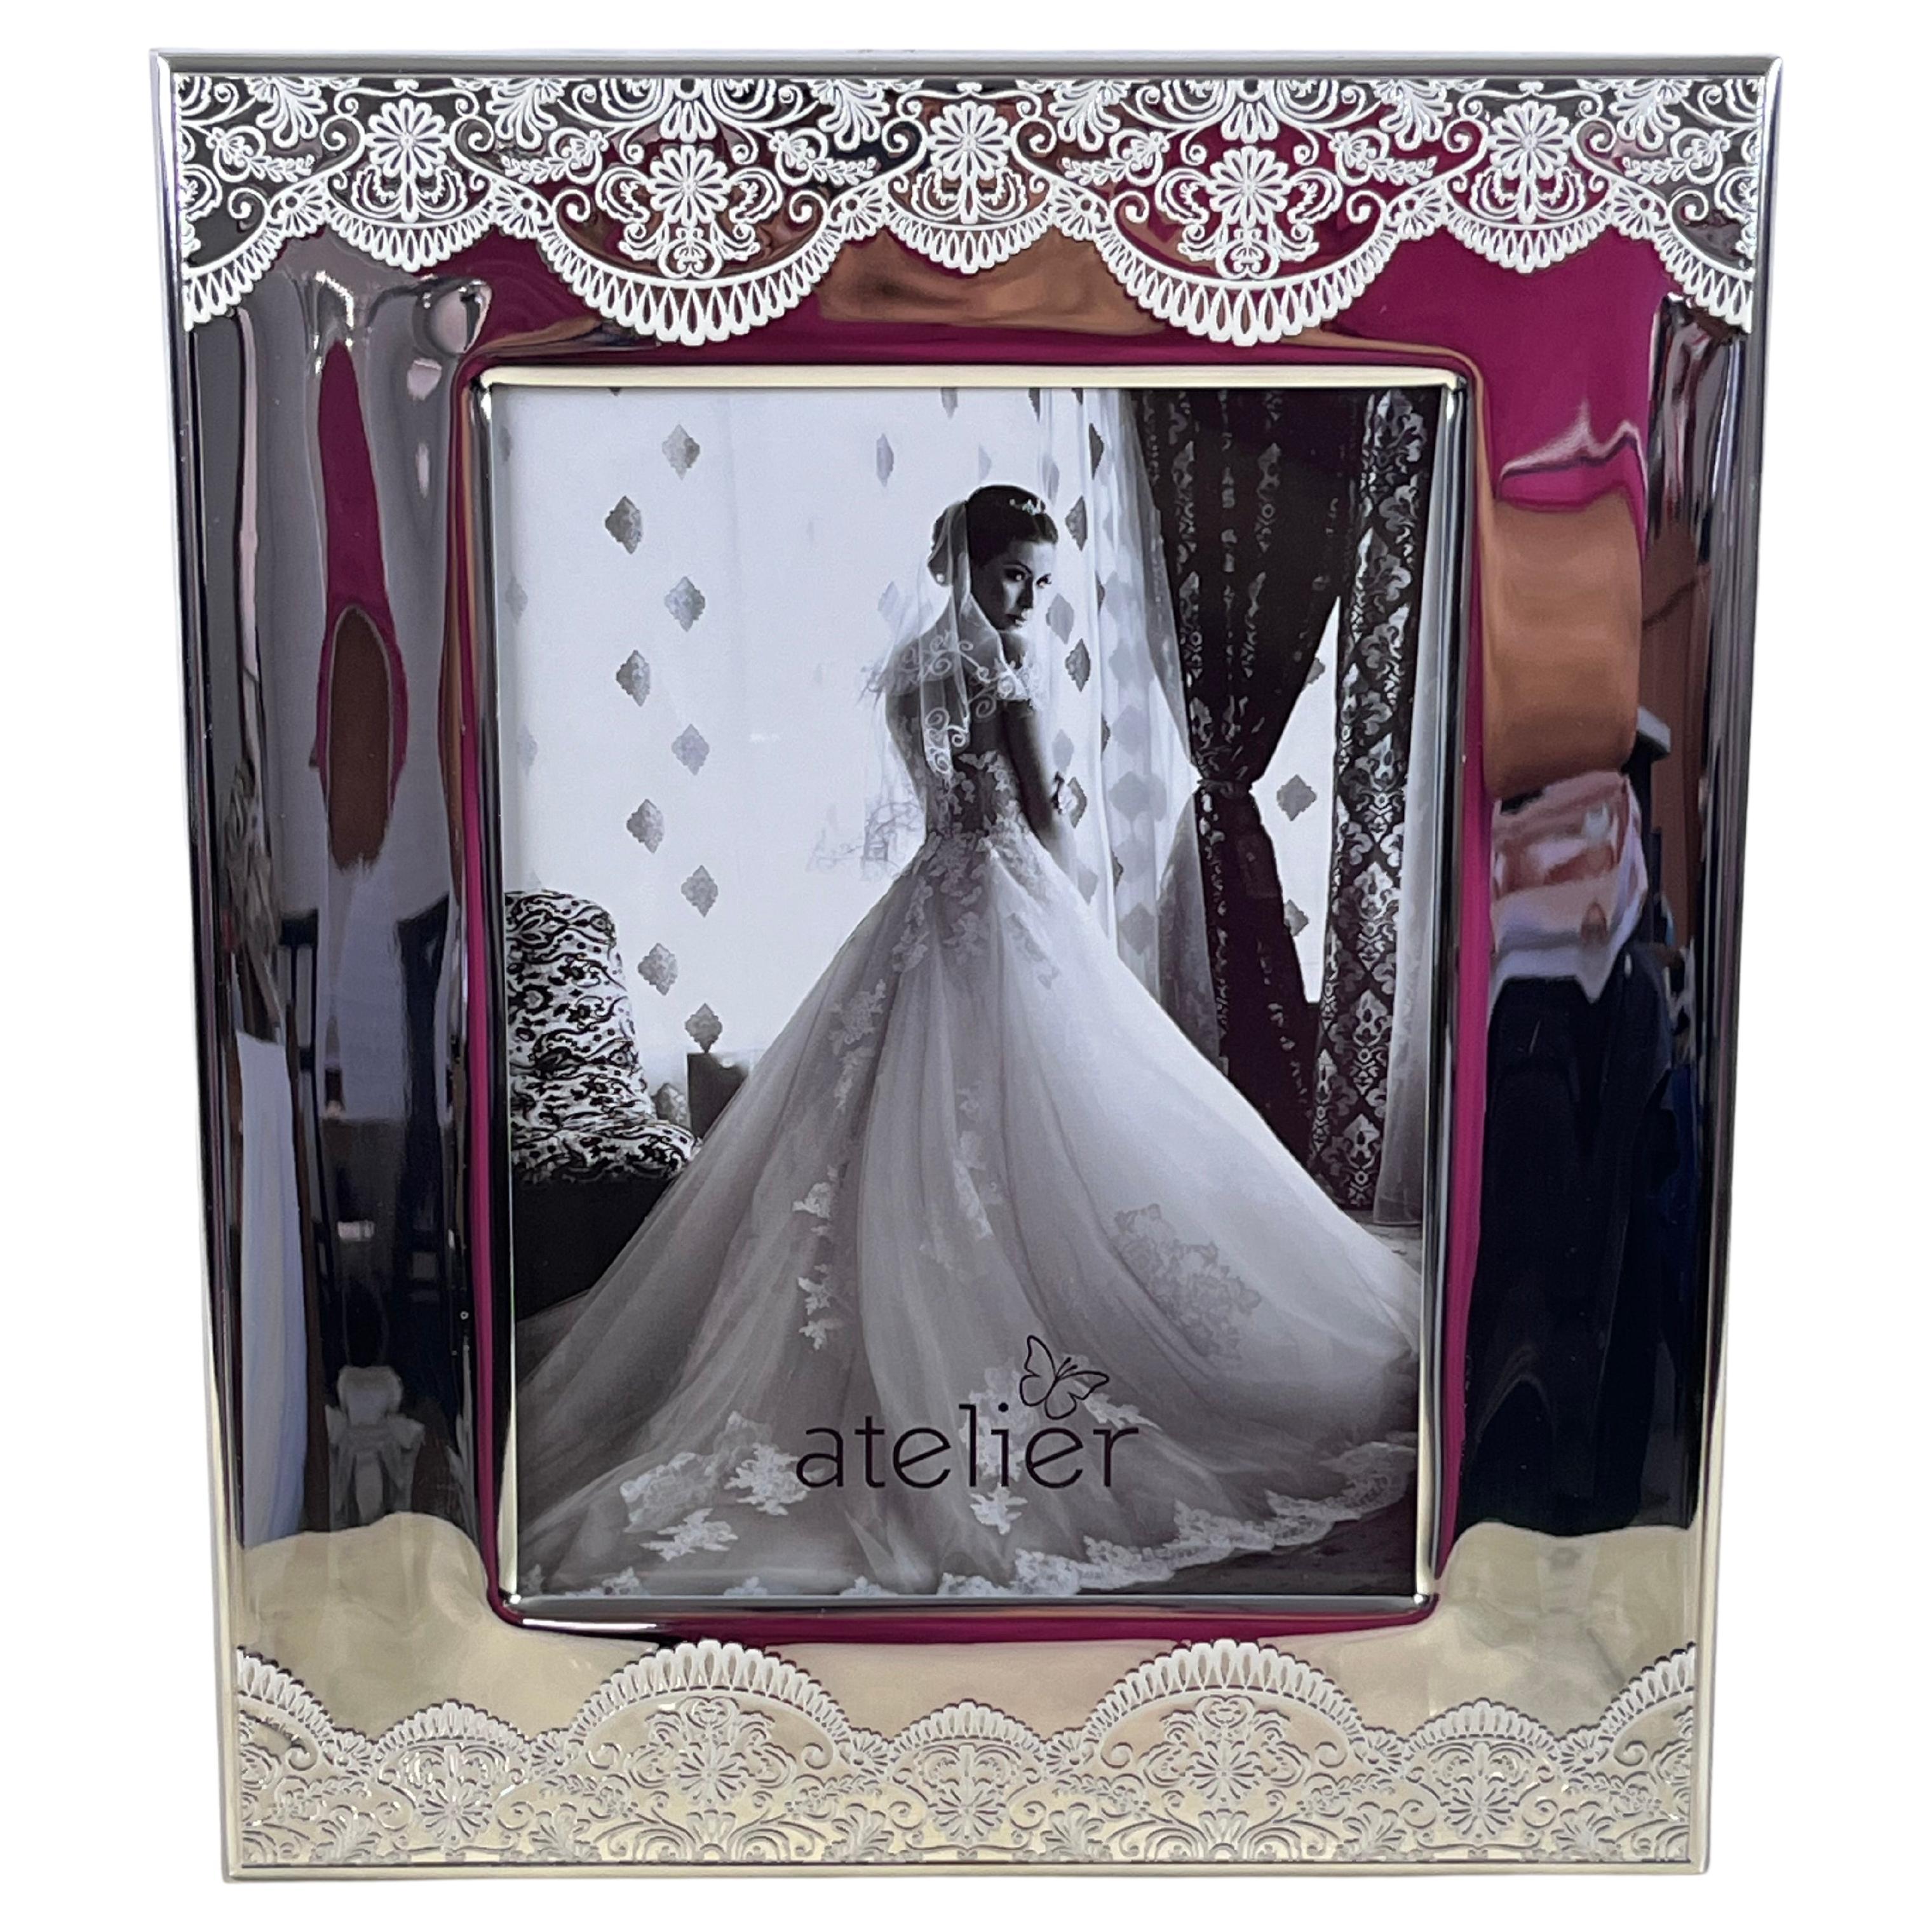 Silver Plate Photo Frame/Mirror, lace design, new For Sale